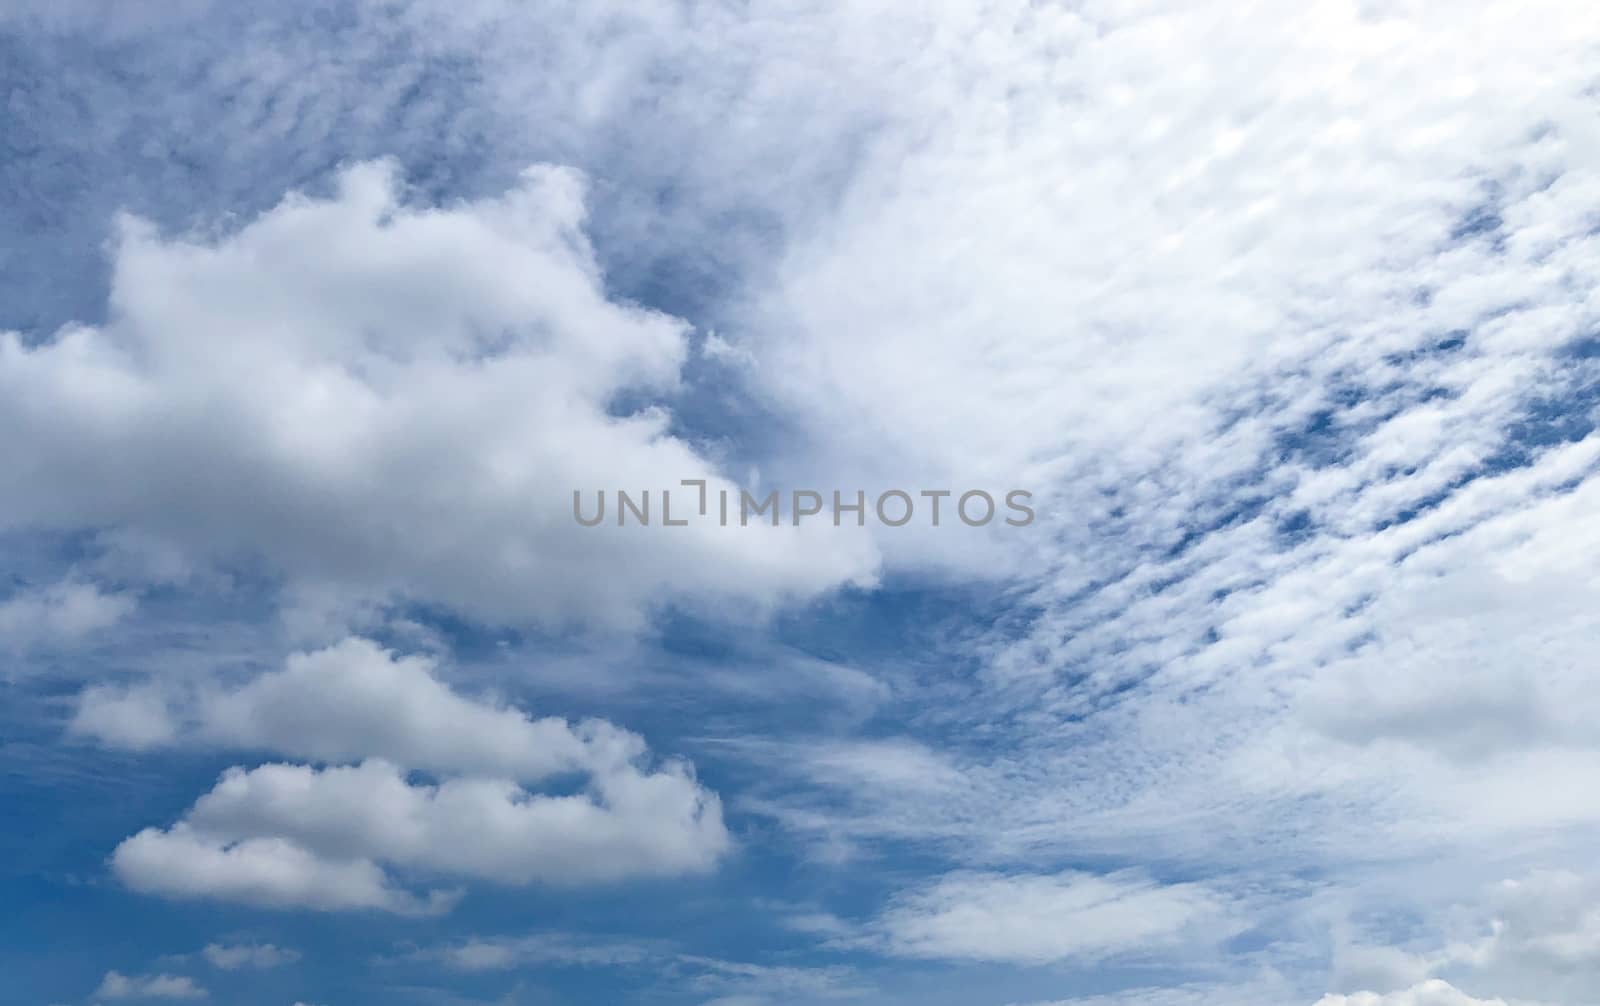 White cloud and Beautiful with blue sky background.